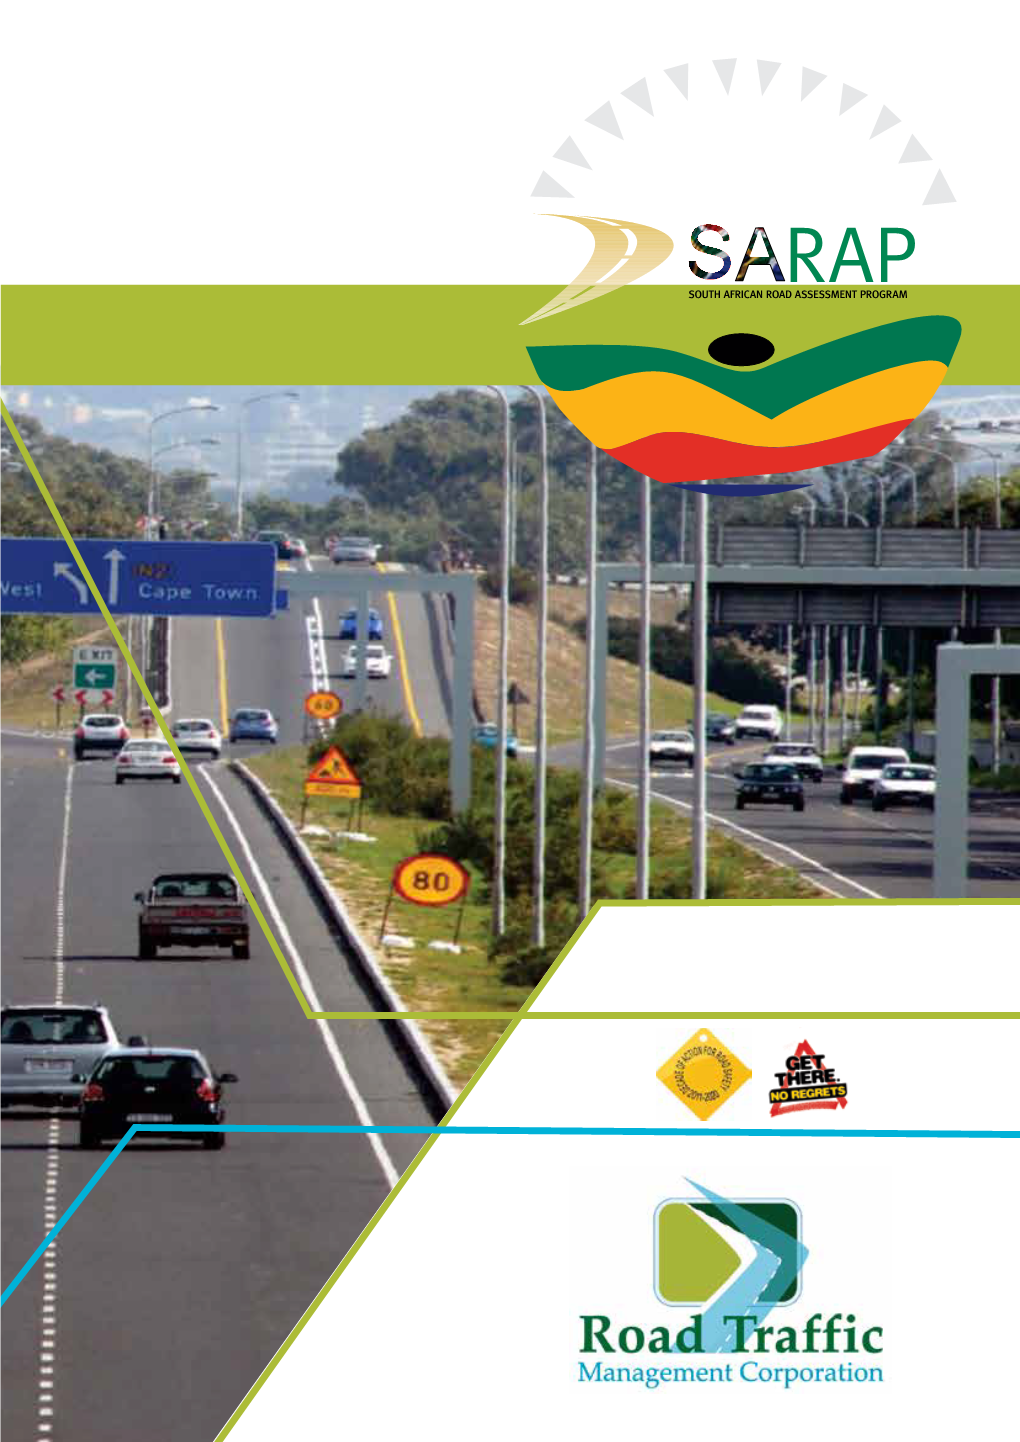 South African Road Assessment Program South Africa Free of High Risk Roads 4 Contents